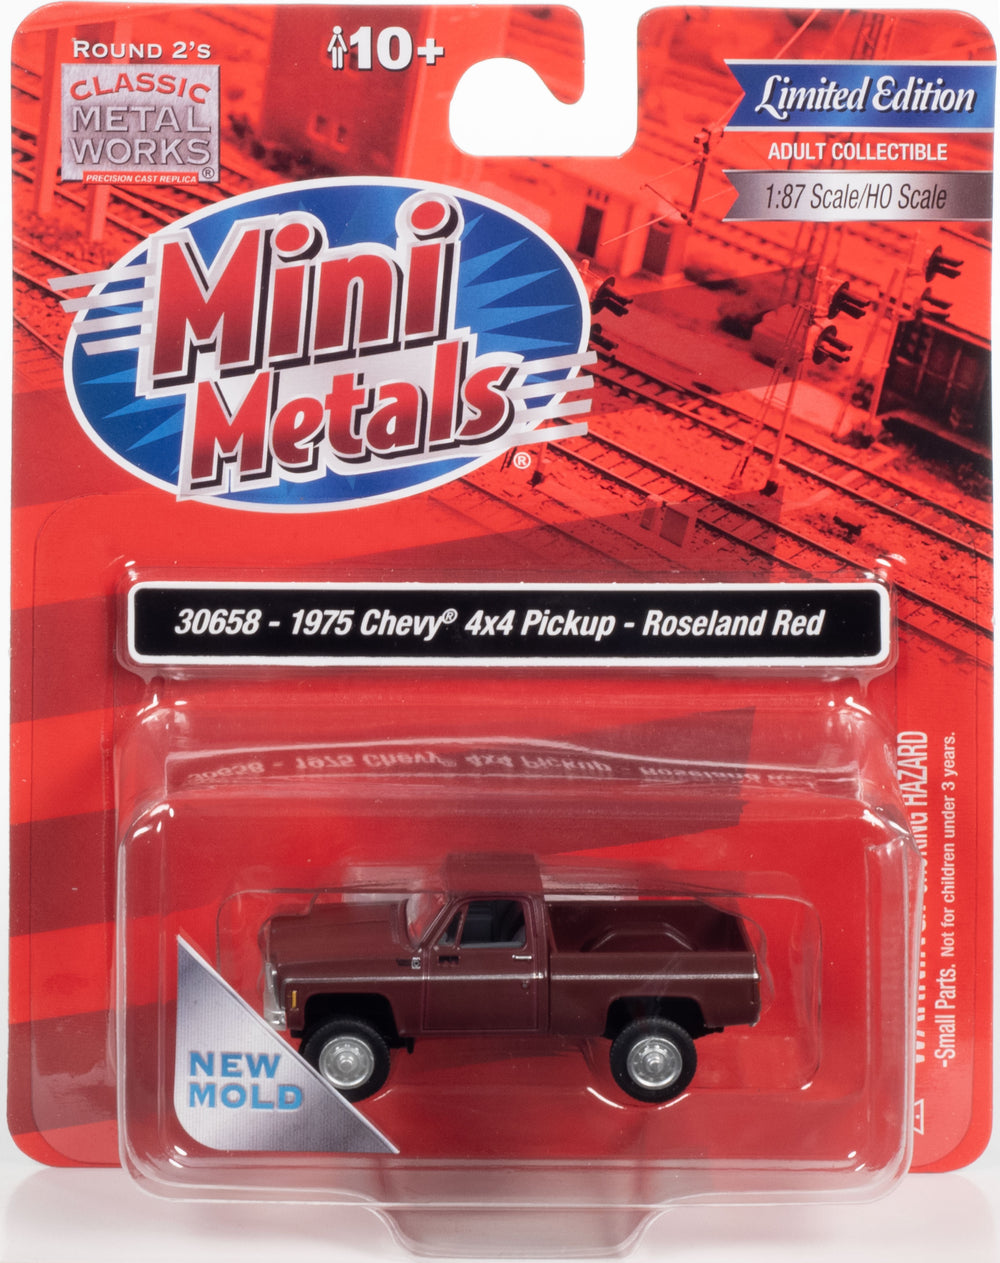 Classic Metal Works 1975 Chevy Pickup 4x4 (Roseland Red) 1:87 HO Scale